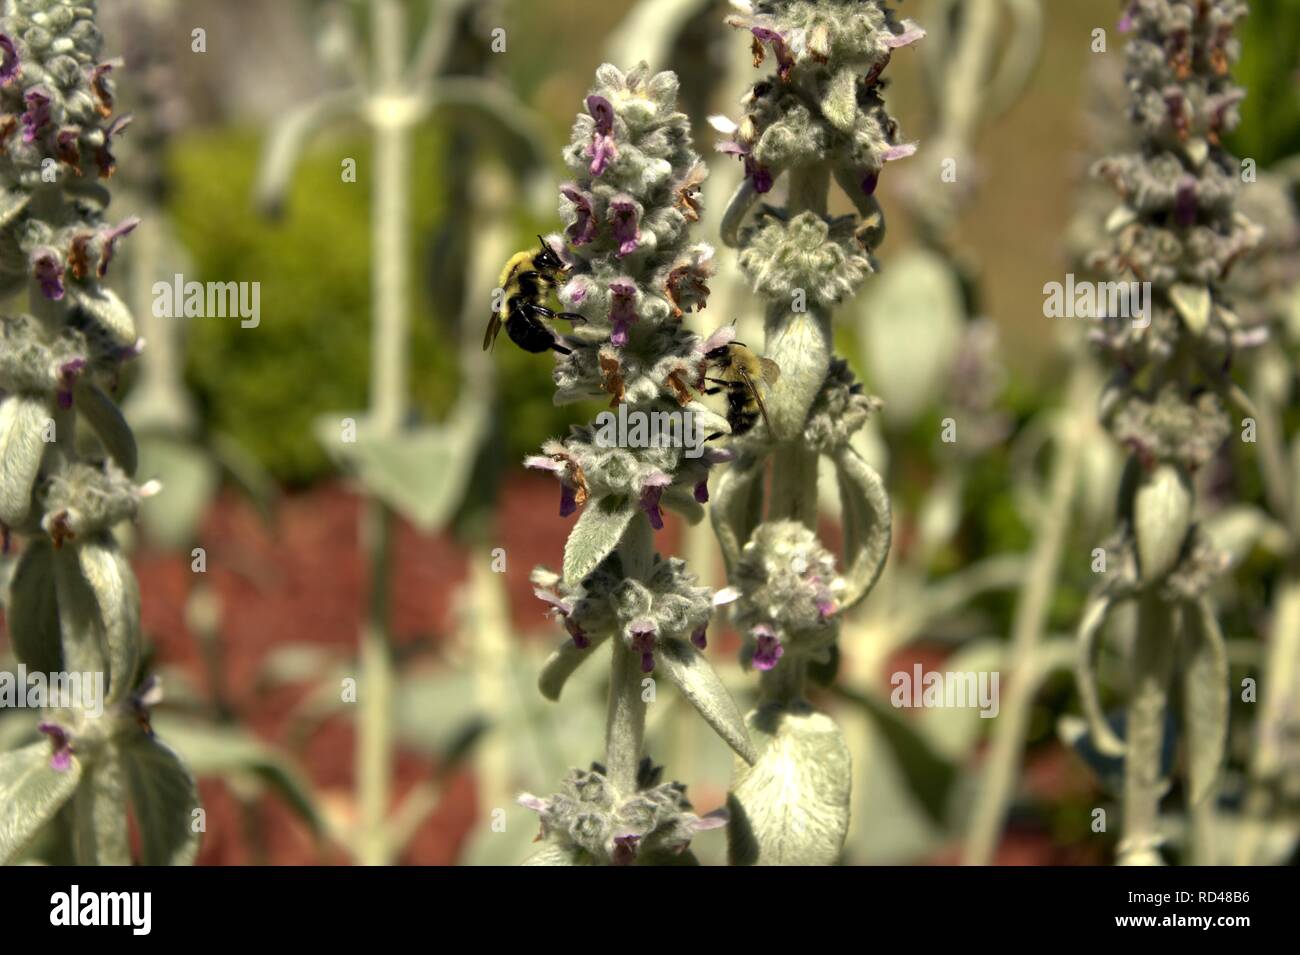 Two Bumblebees On Lamb's Ear Stock Photo